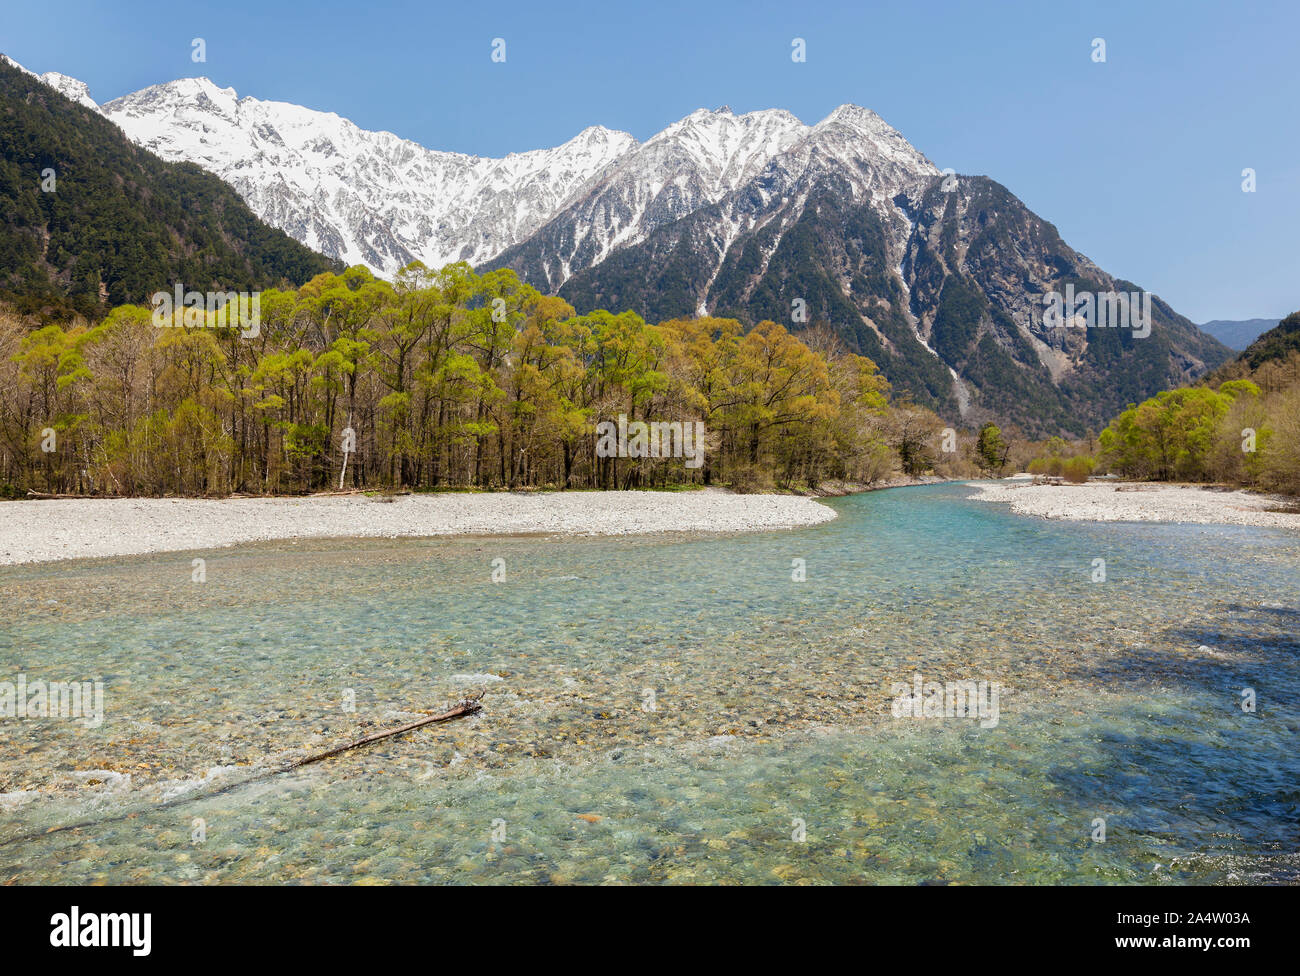 The clear waters of the Azusa River running through the trees at Kamikochi with Japan's Northern Alps in the background. Stock Photo